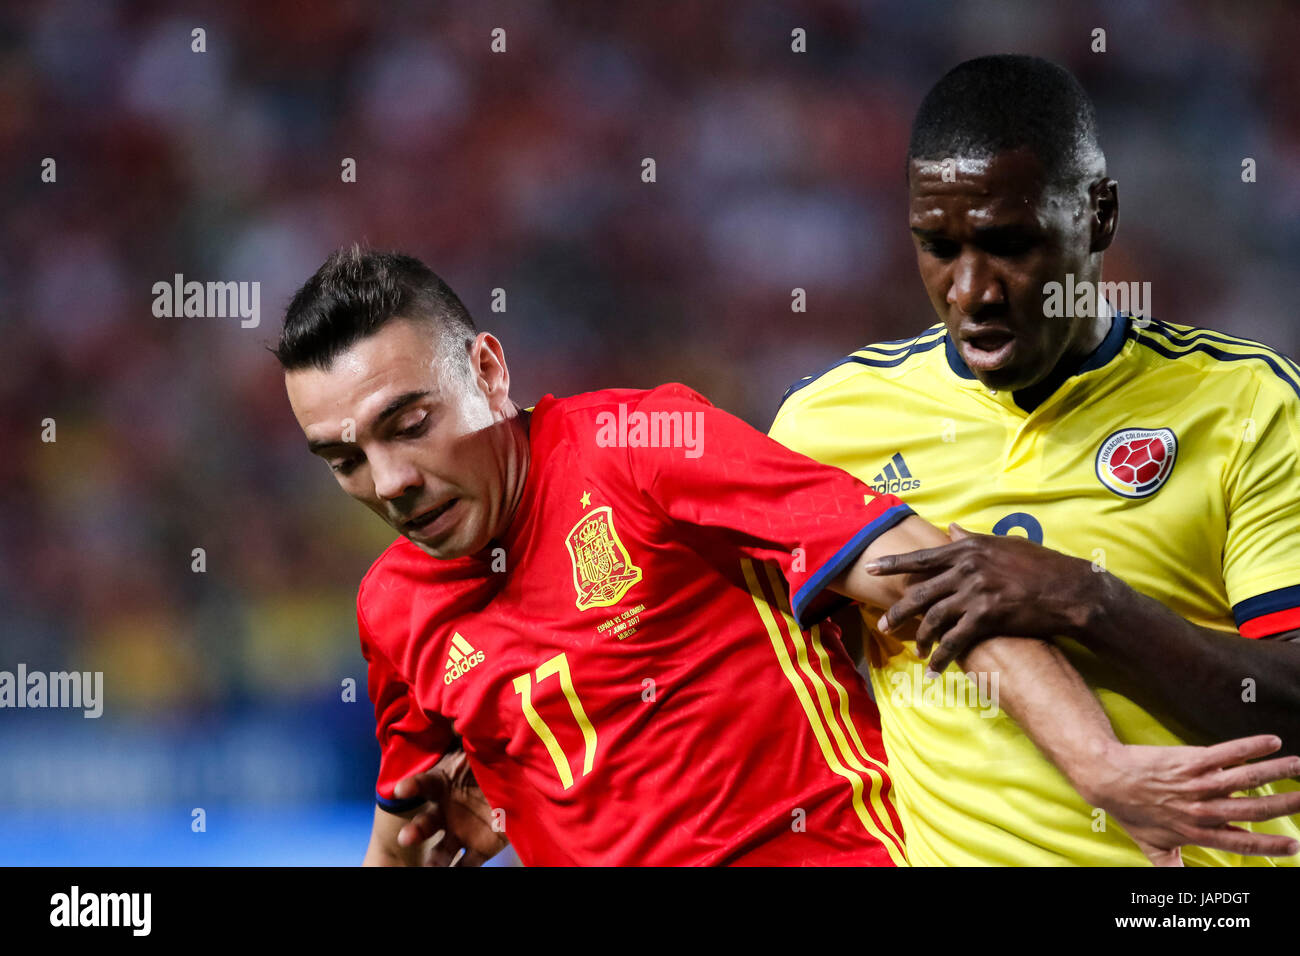 Murcia, Spain. 7th June, 2017. International friendly match between National Football Team of Spain and Colombia at Nueva Condomina Stadium in Murcia. © ABEL F. ROS/Alamy Live News Stock Photo